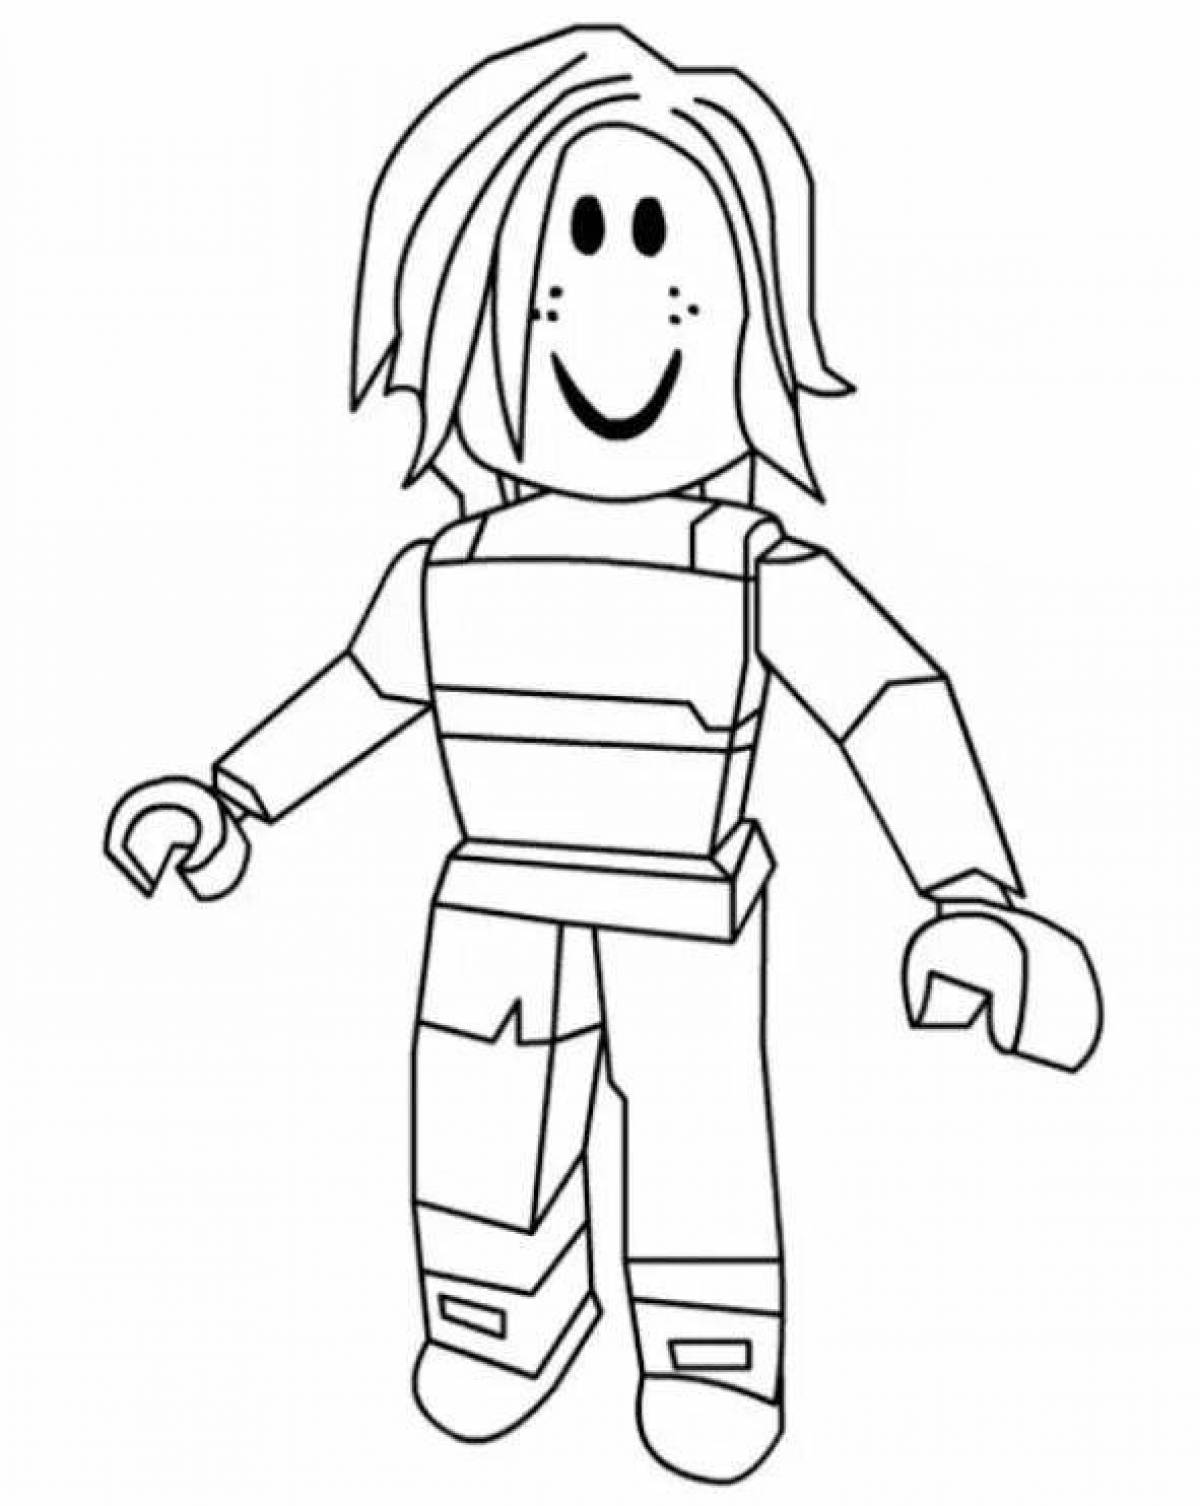 Roblox game coloring page